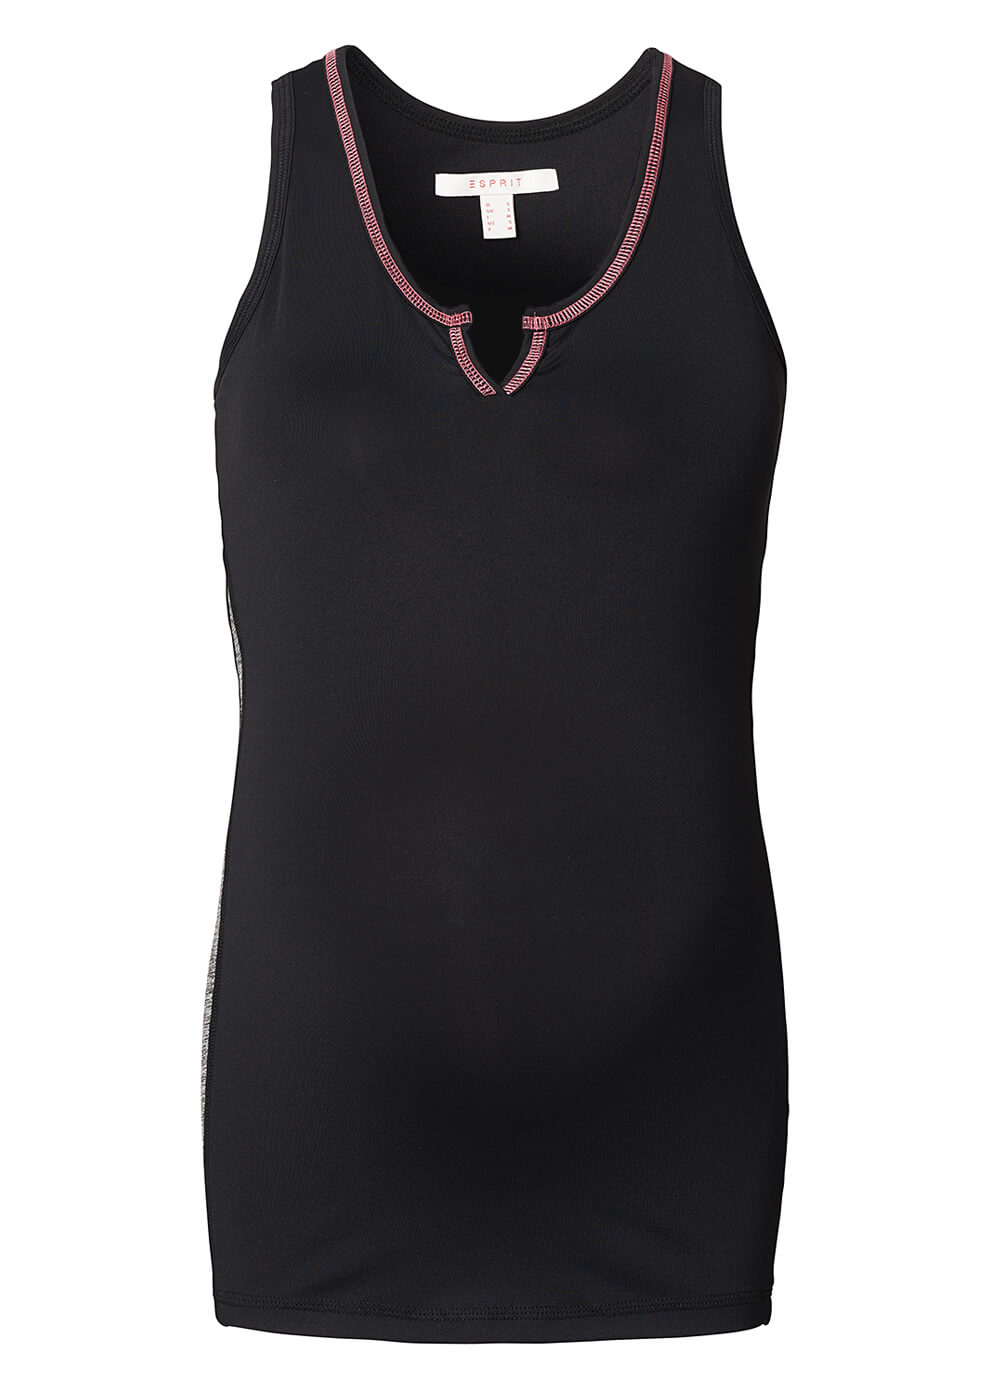 Maternity Active Sports Tank Top in Black by Esprit